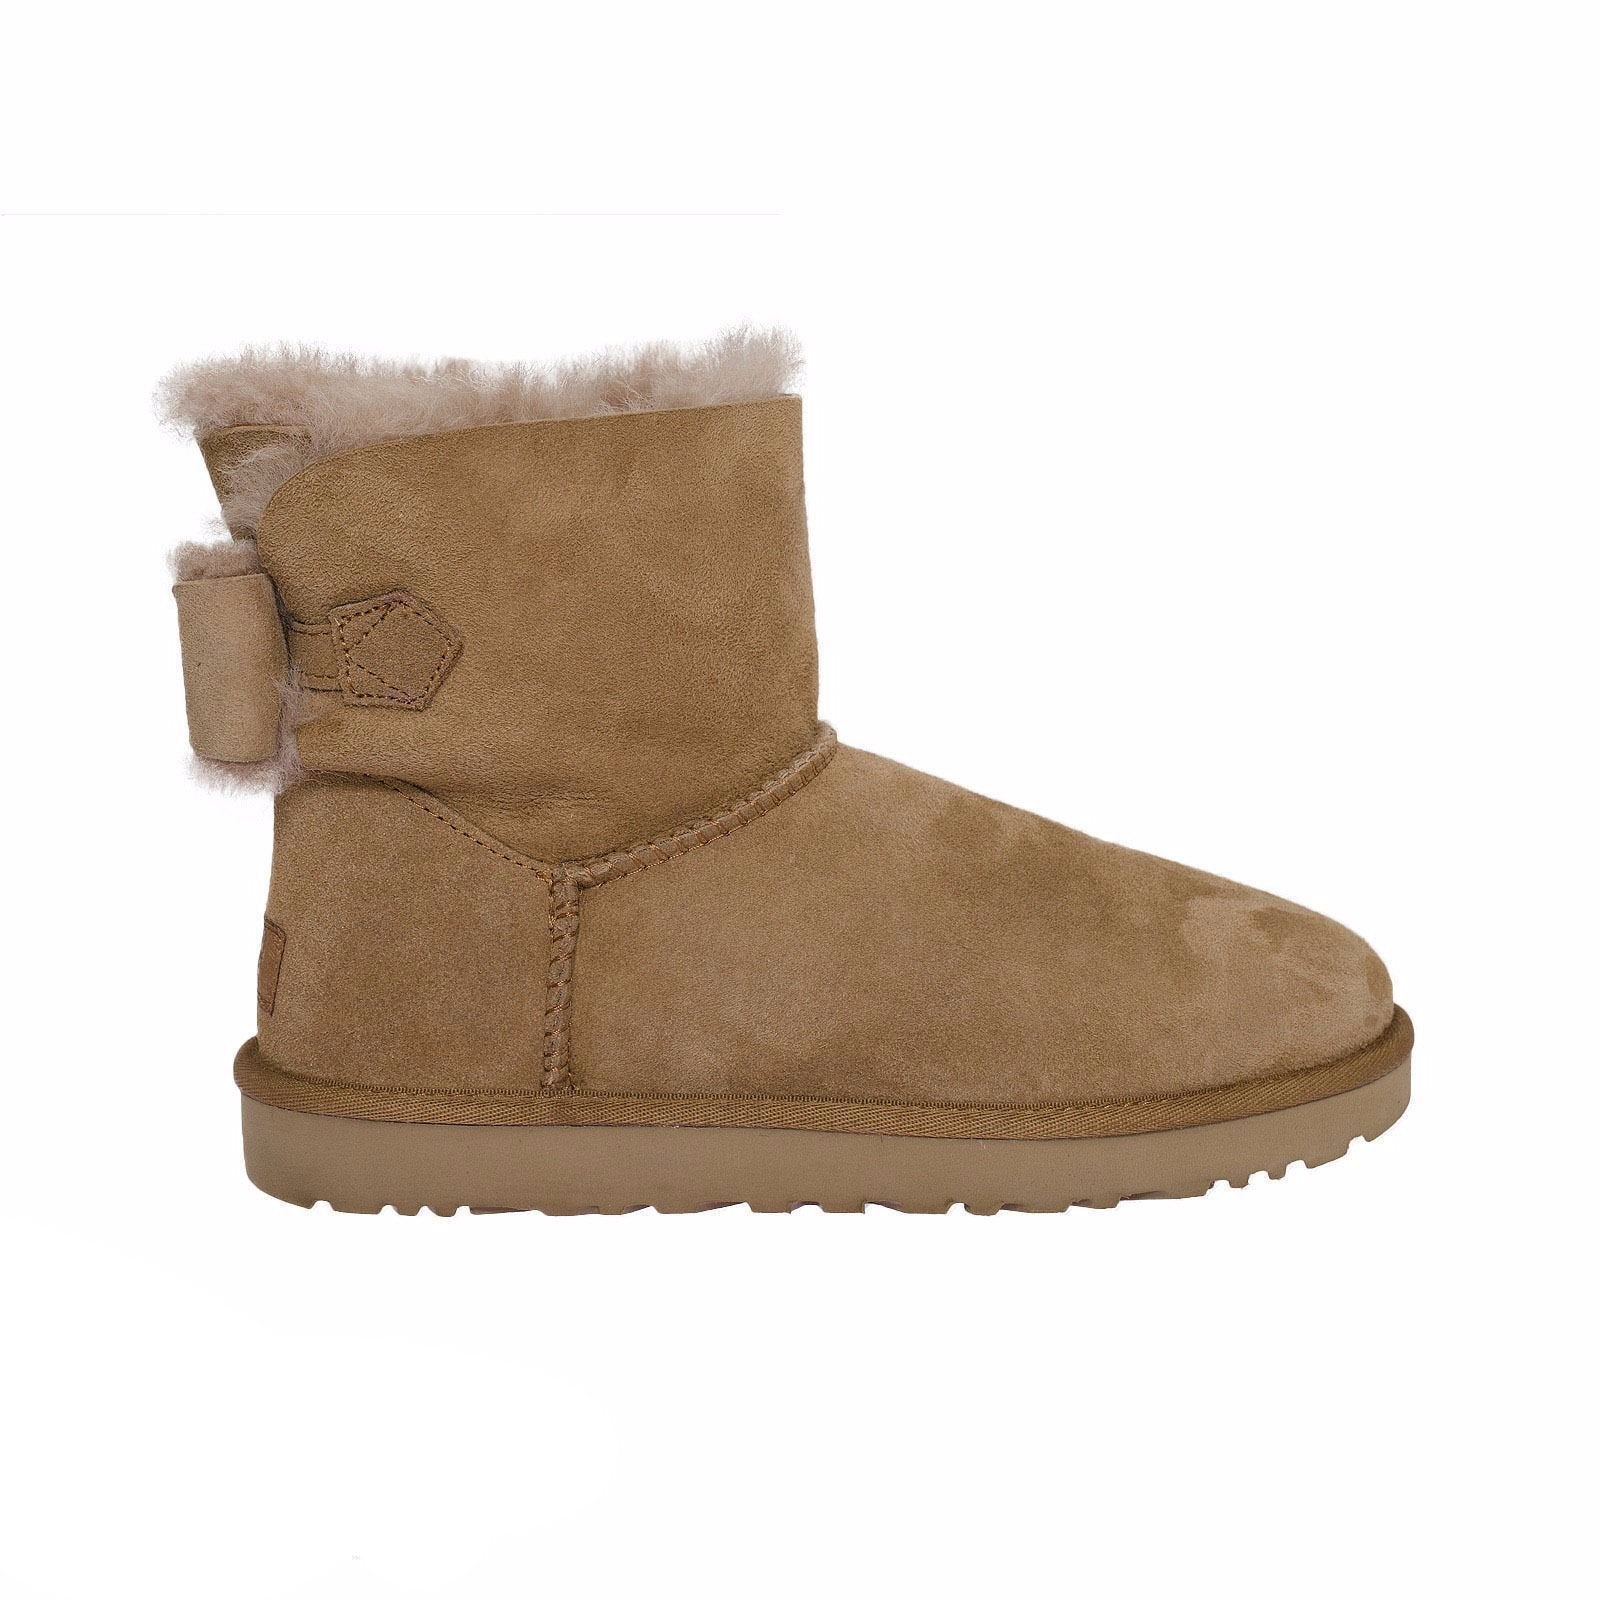 ugg naveah chestnut Cheaper Than Retail 